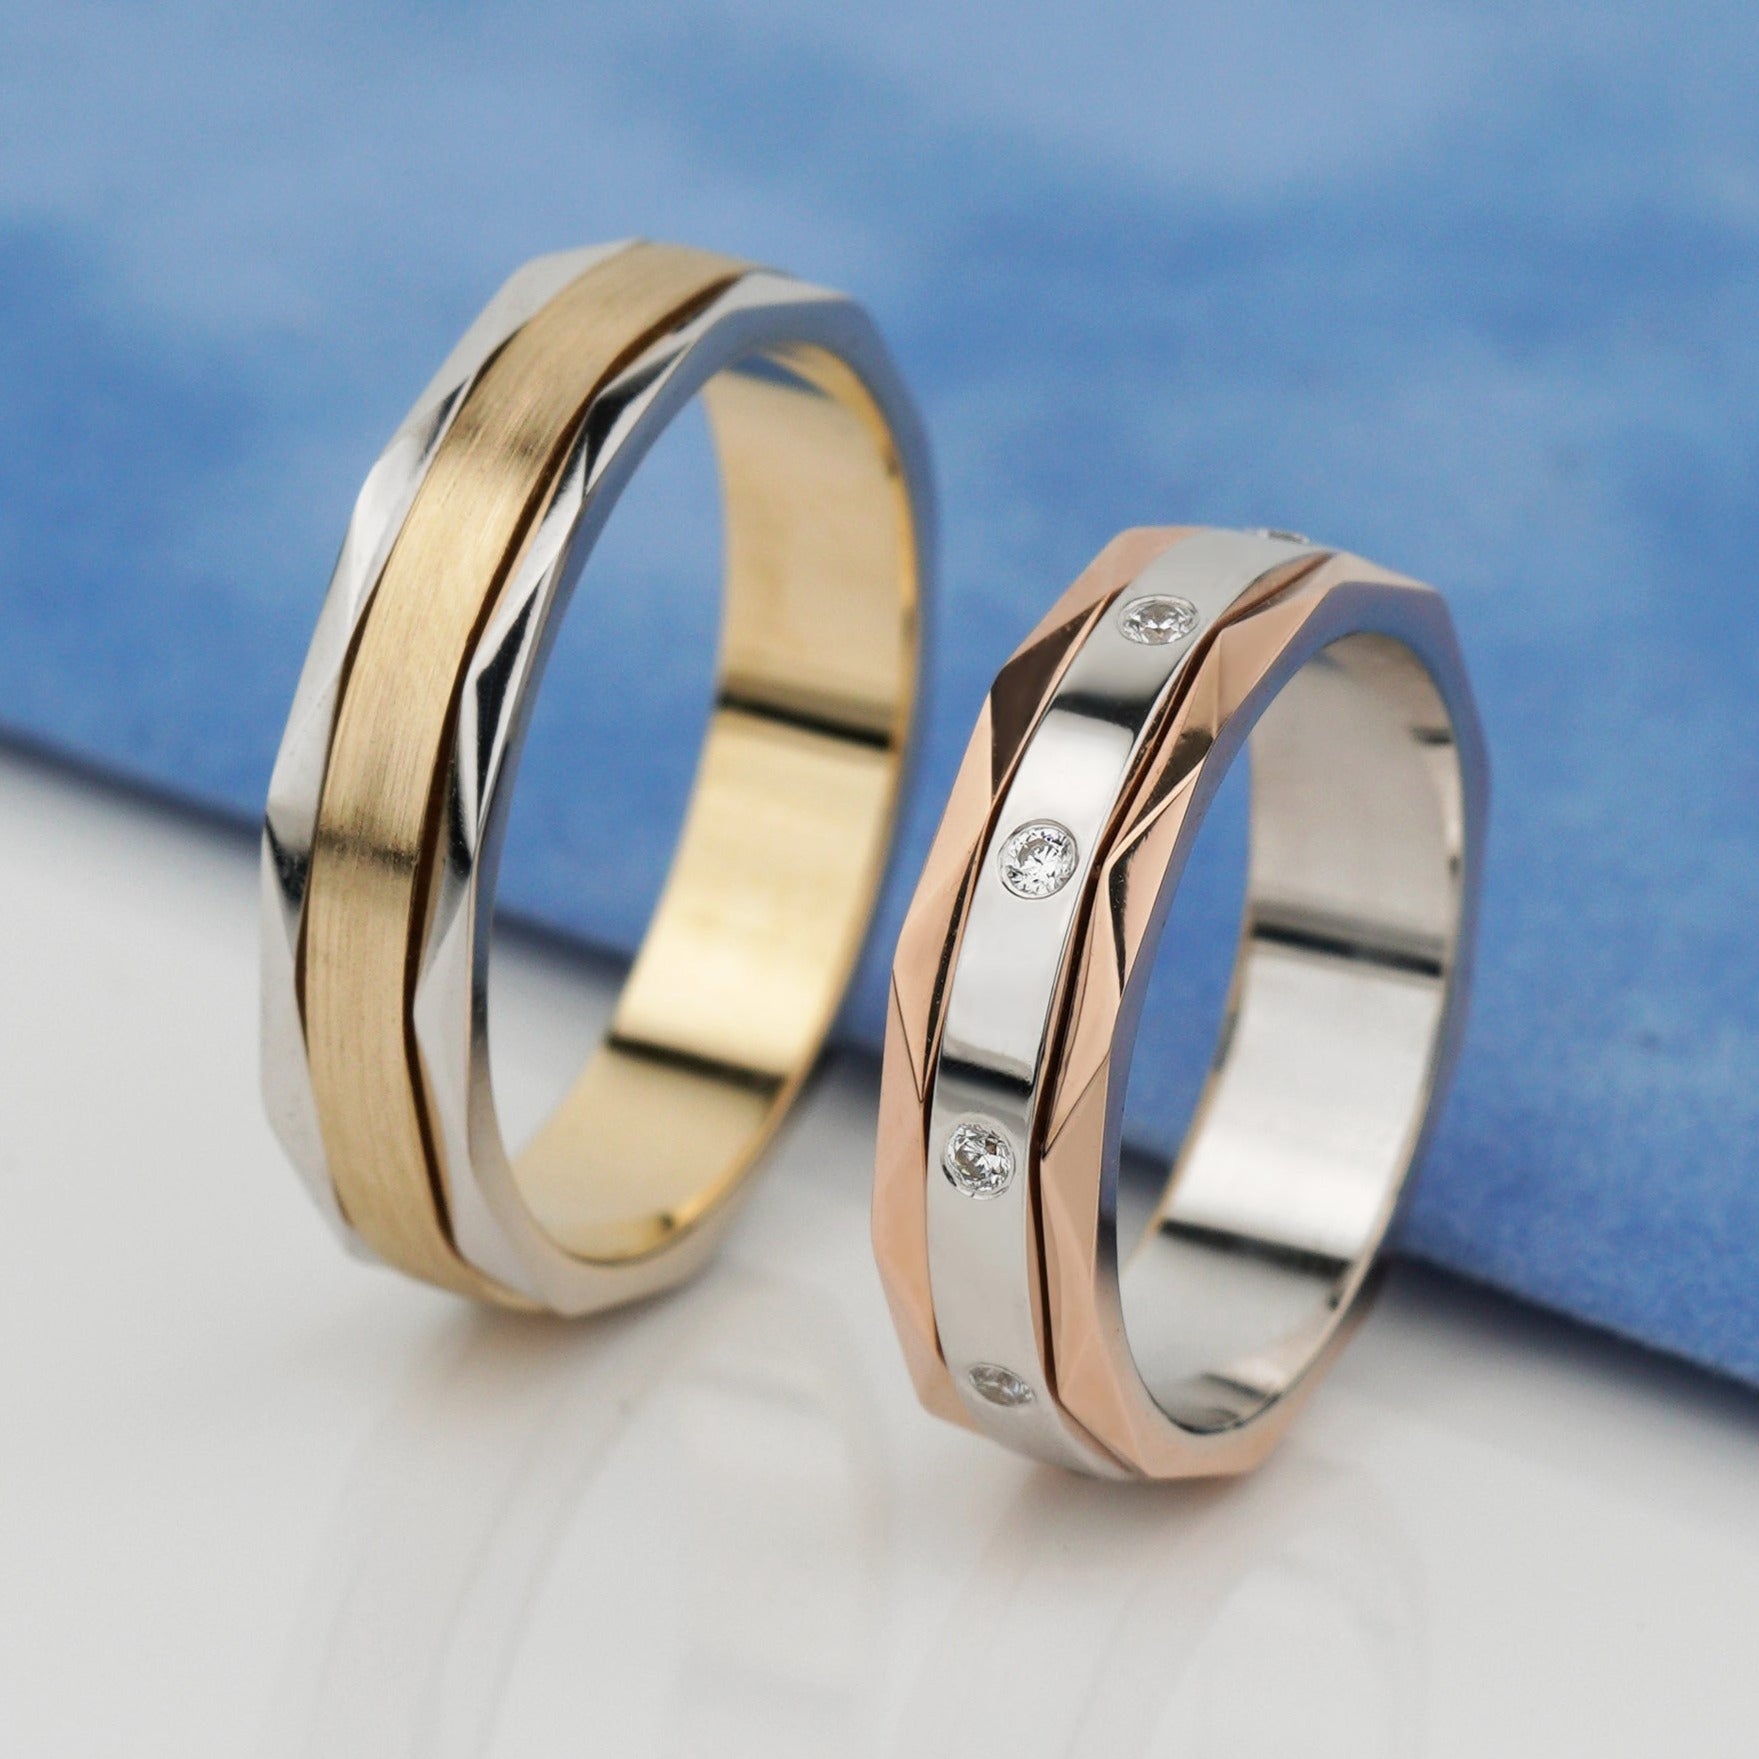 Matching wedding rings set. His and hers wedding rings. Gold wedding bands set. Couple bands. Solid gold wedding bands. Rings for couples. Unique wedding rings set. 